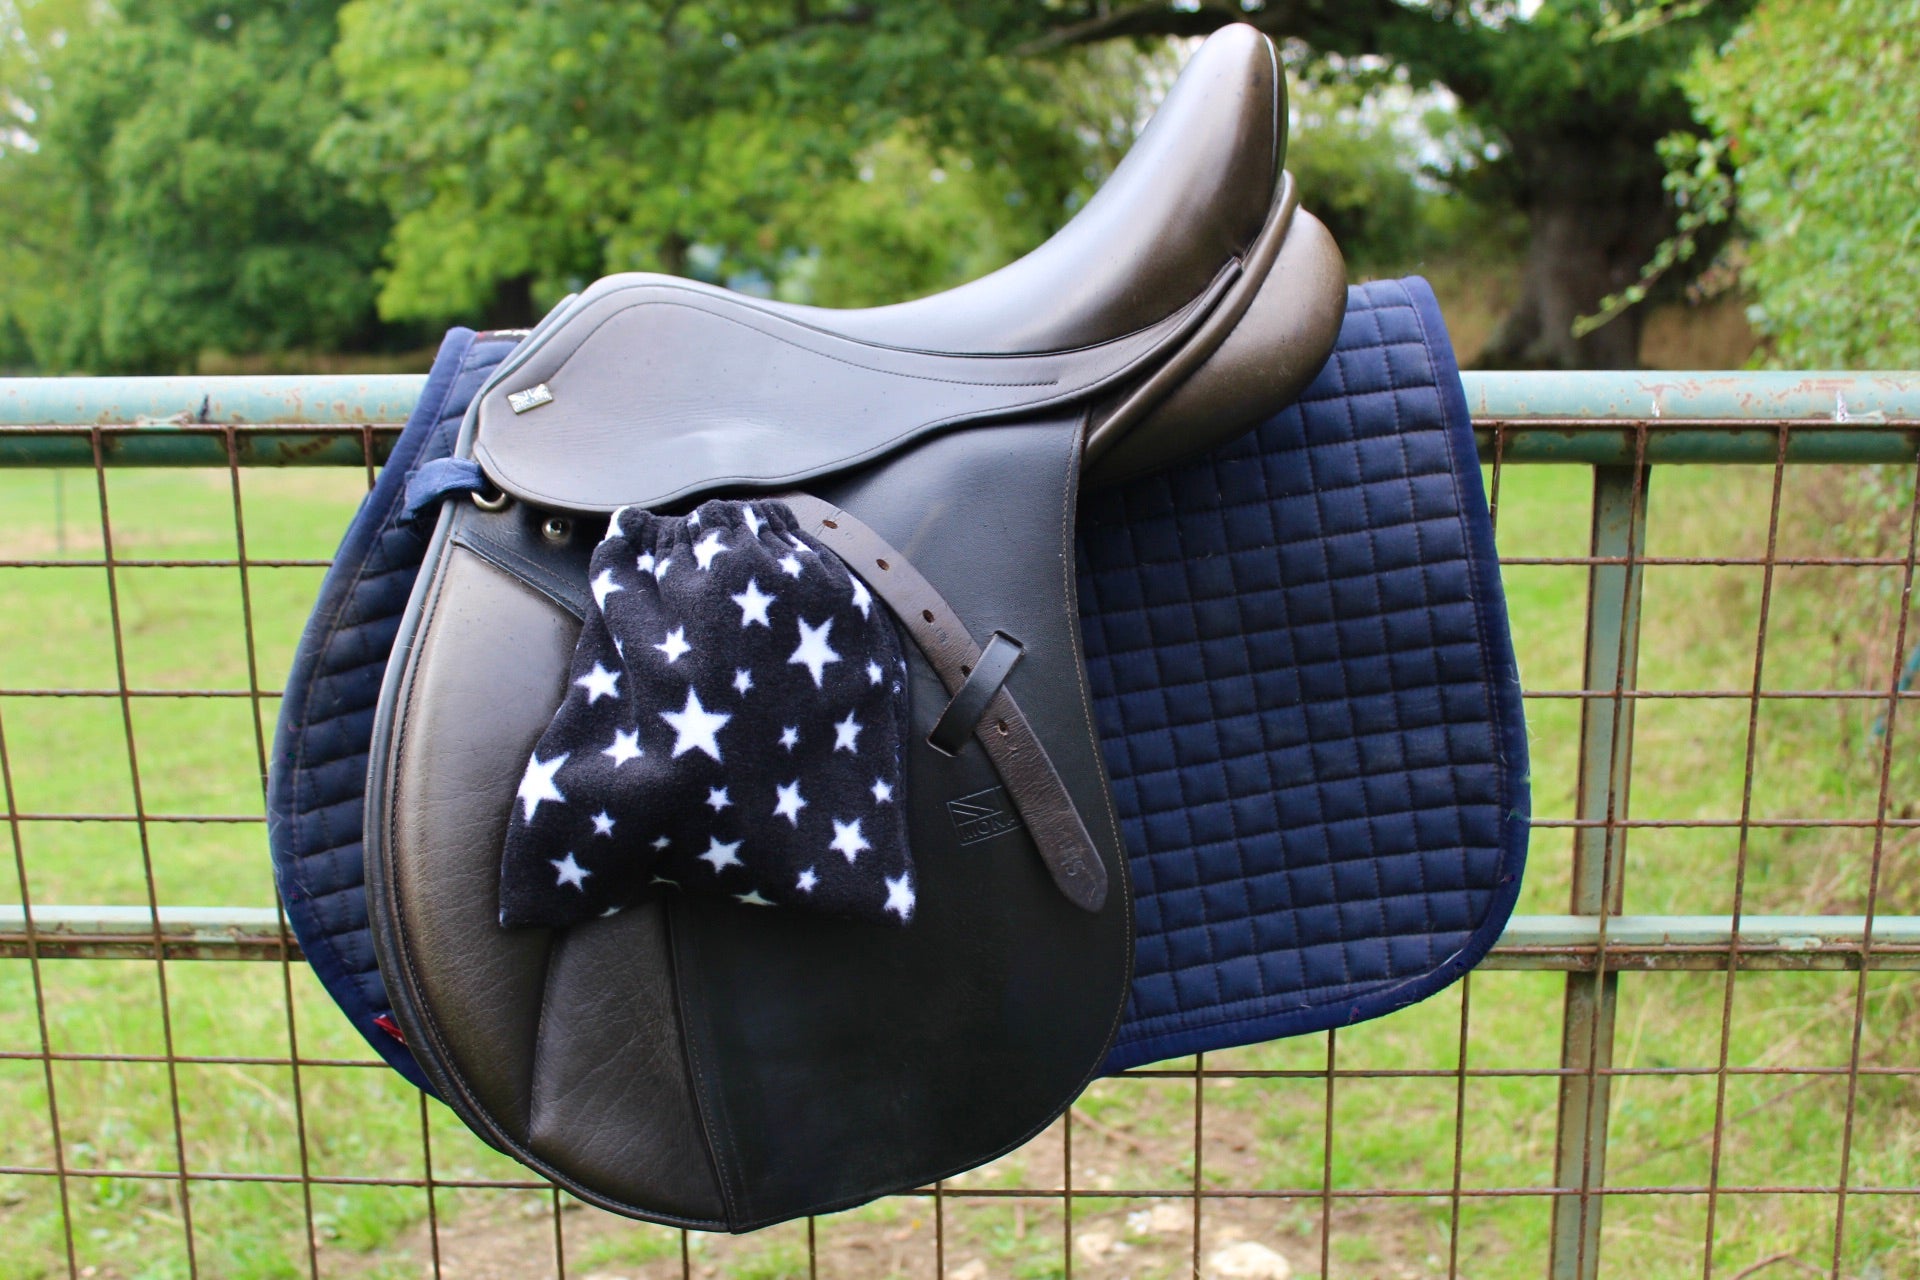 black stirrup covers with white stars on them, on a brown monarch saddle which has a navy le Mieux saddle pad under, on a field fence